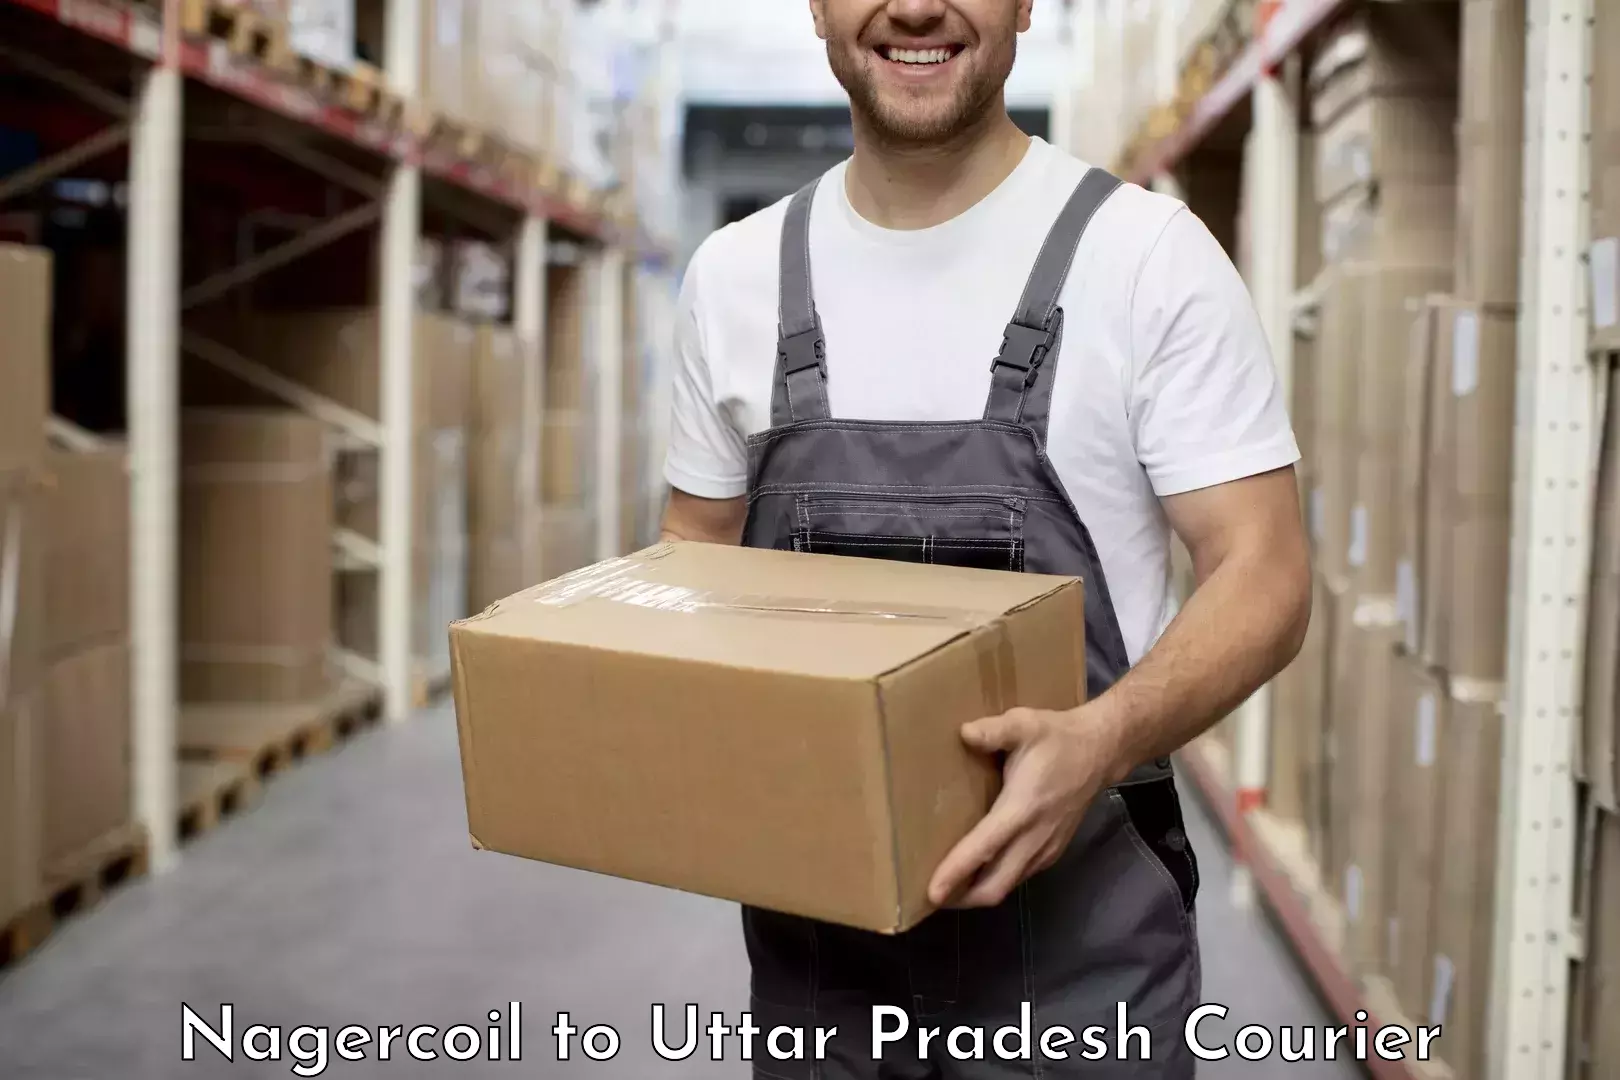 Automated parcel services Nagercoil to Kaushambi